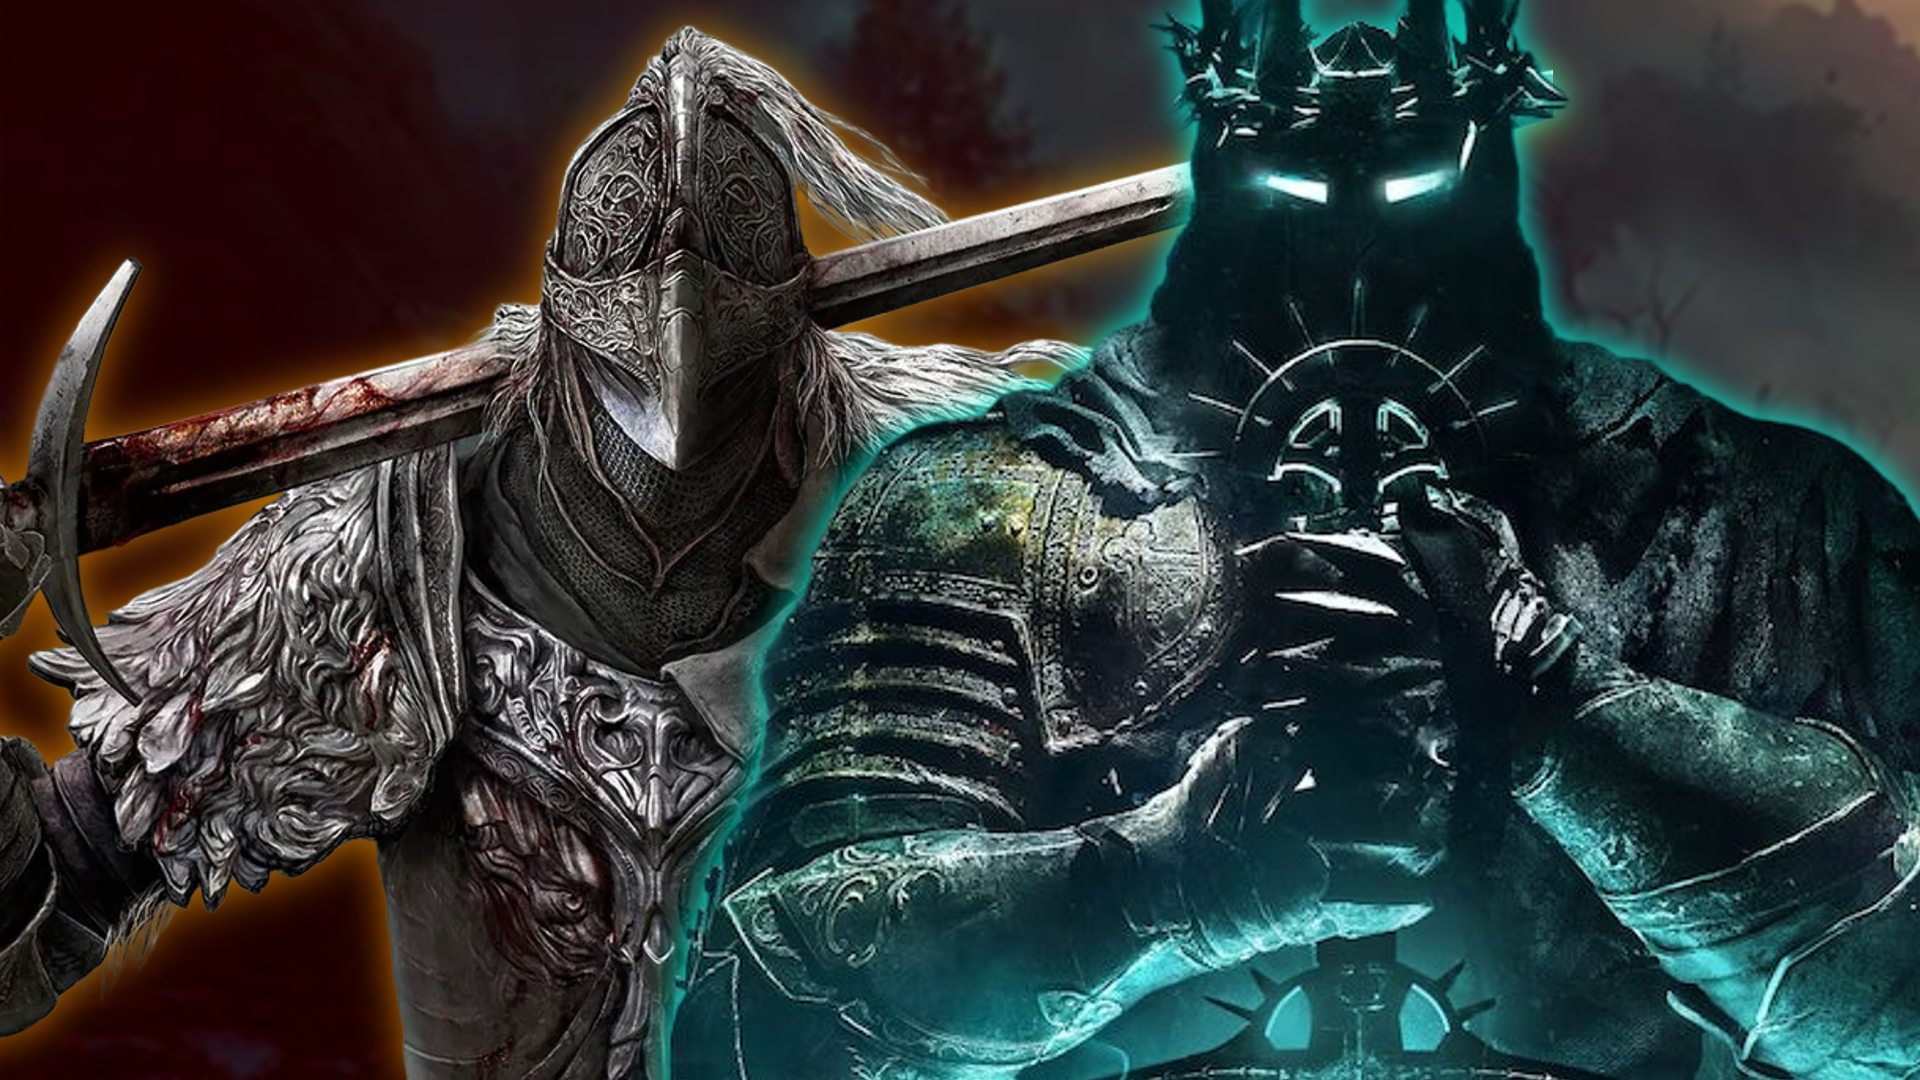 Elden Ring vs Dark Souls: Which is the better FromSoftware title?